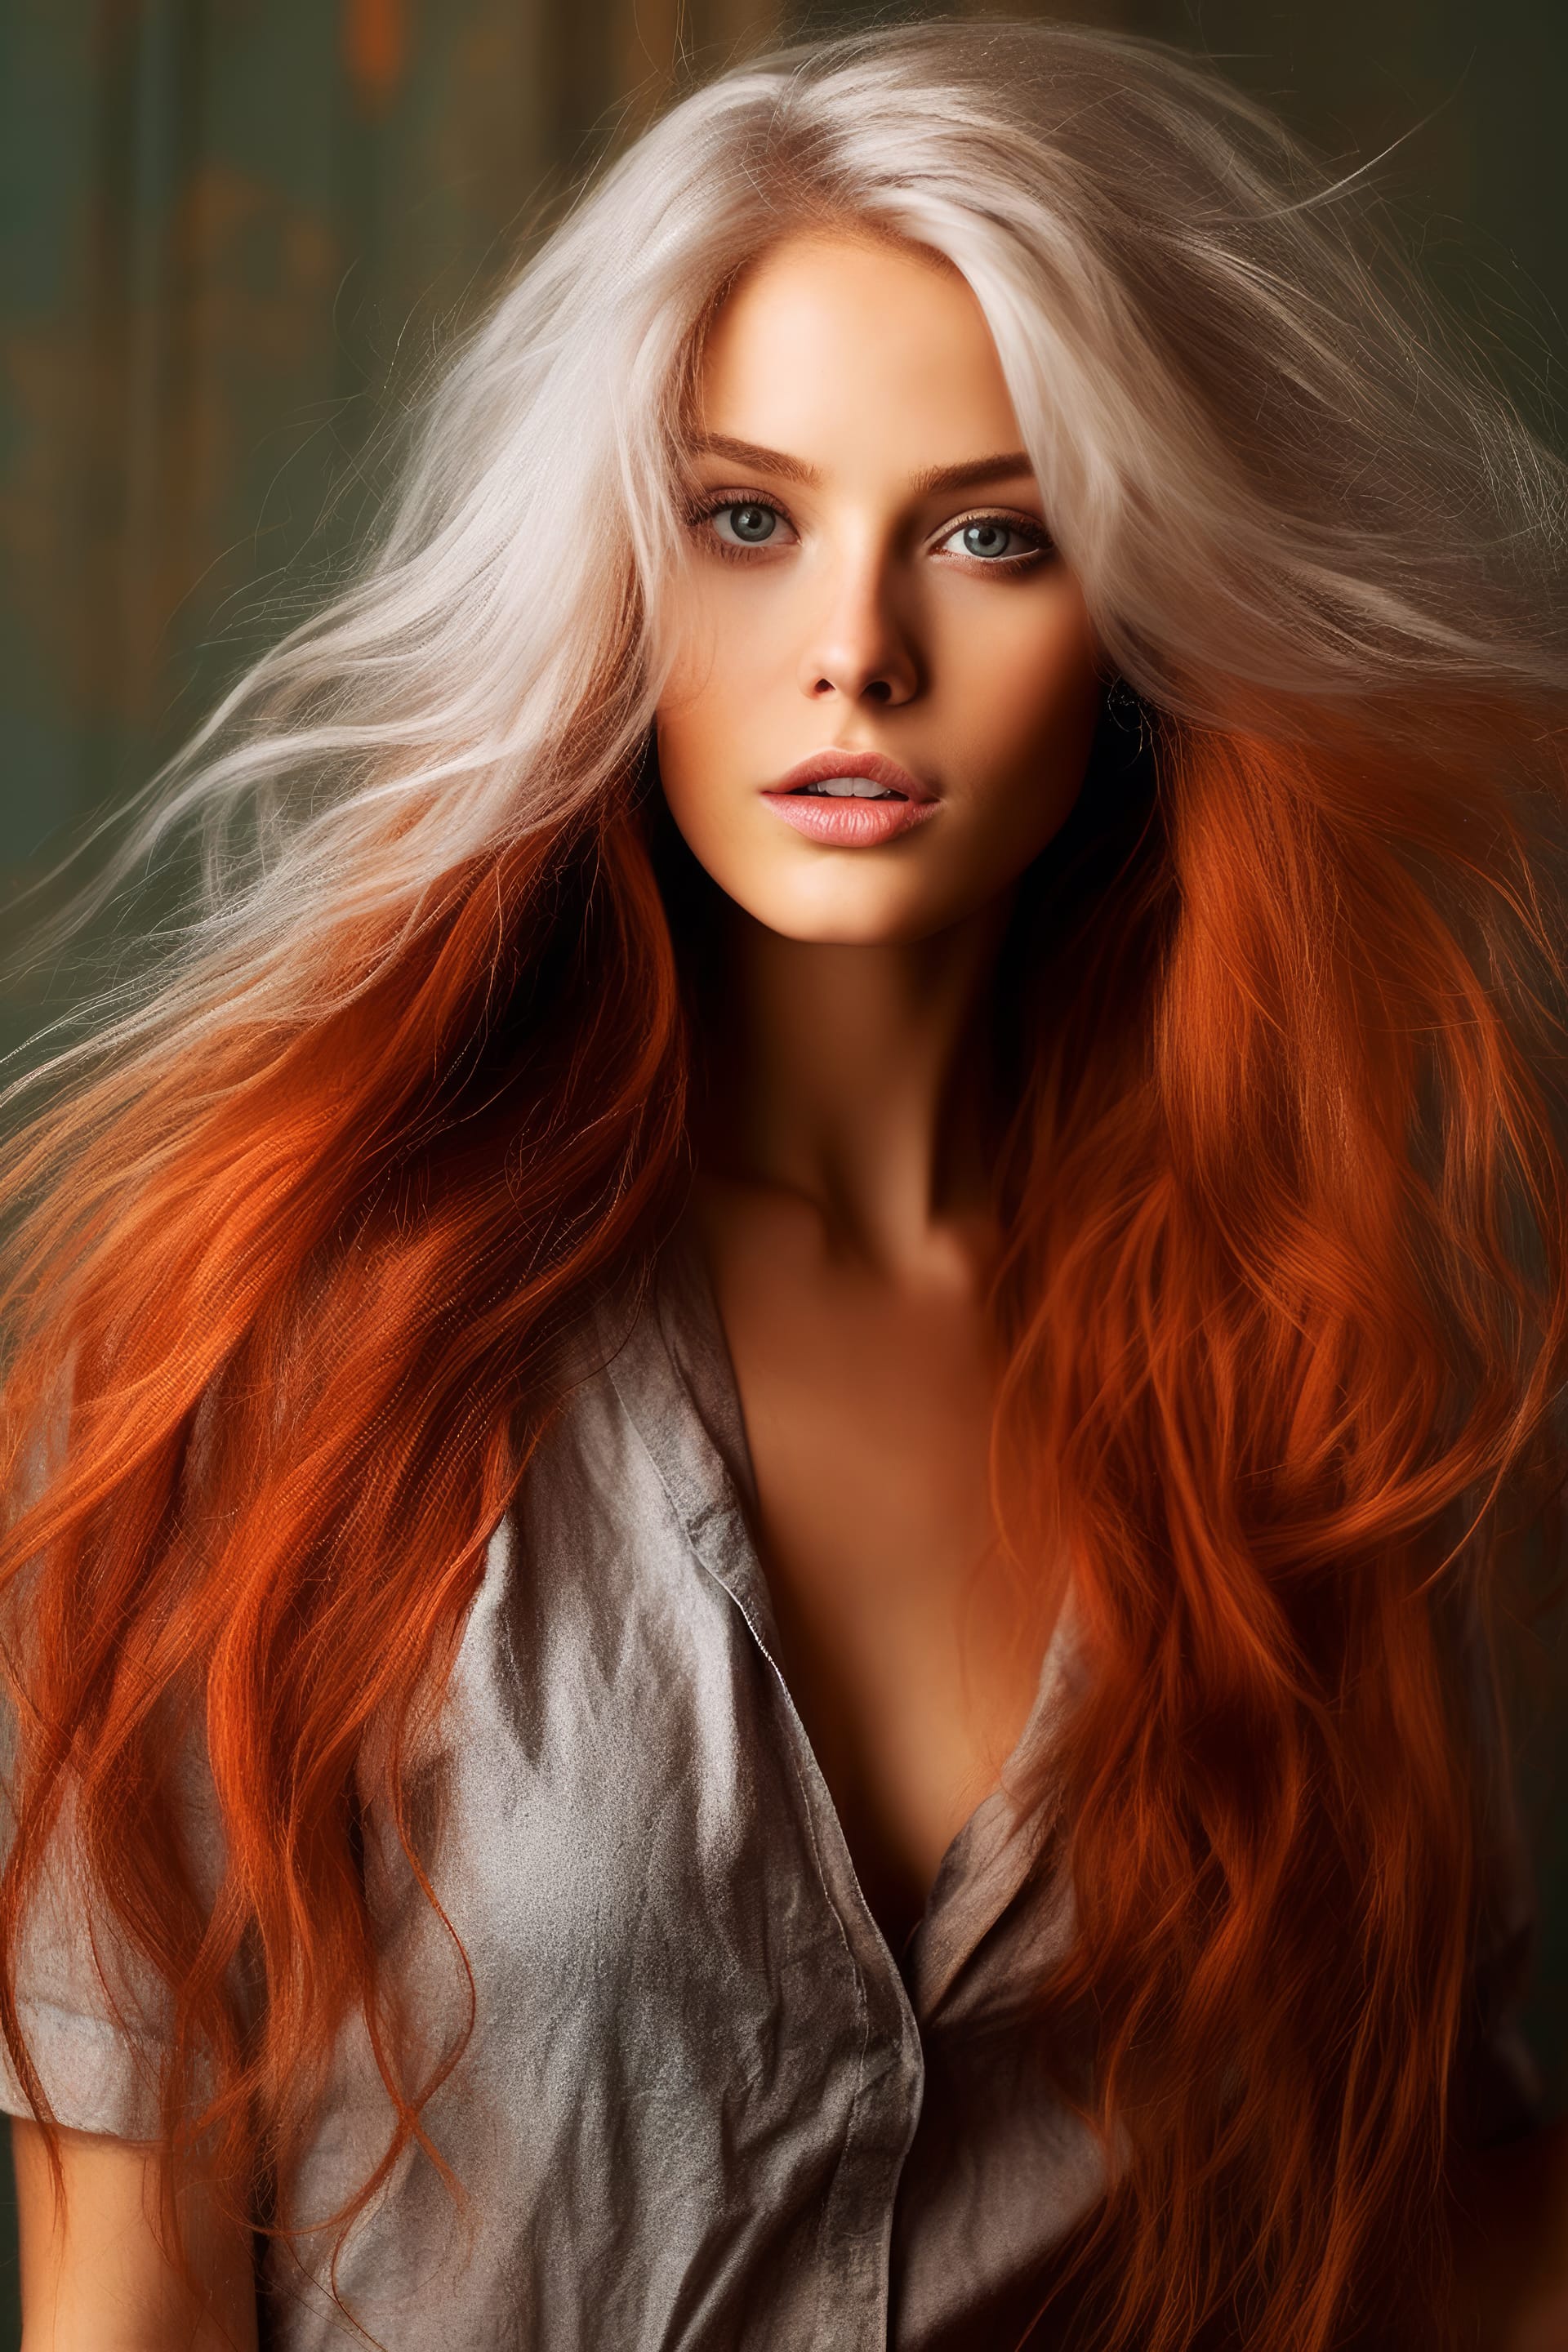 Girl with red hair silver dress best instagram profile pictures